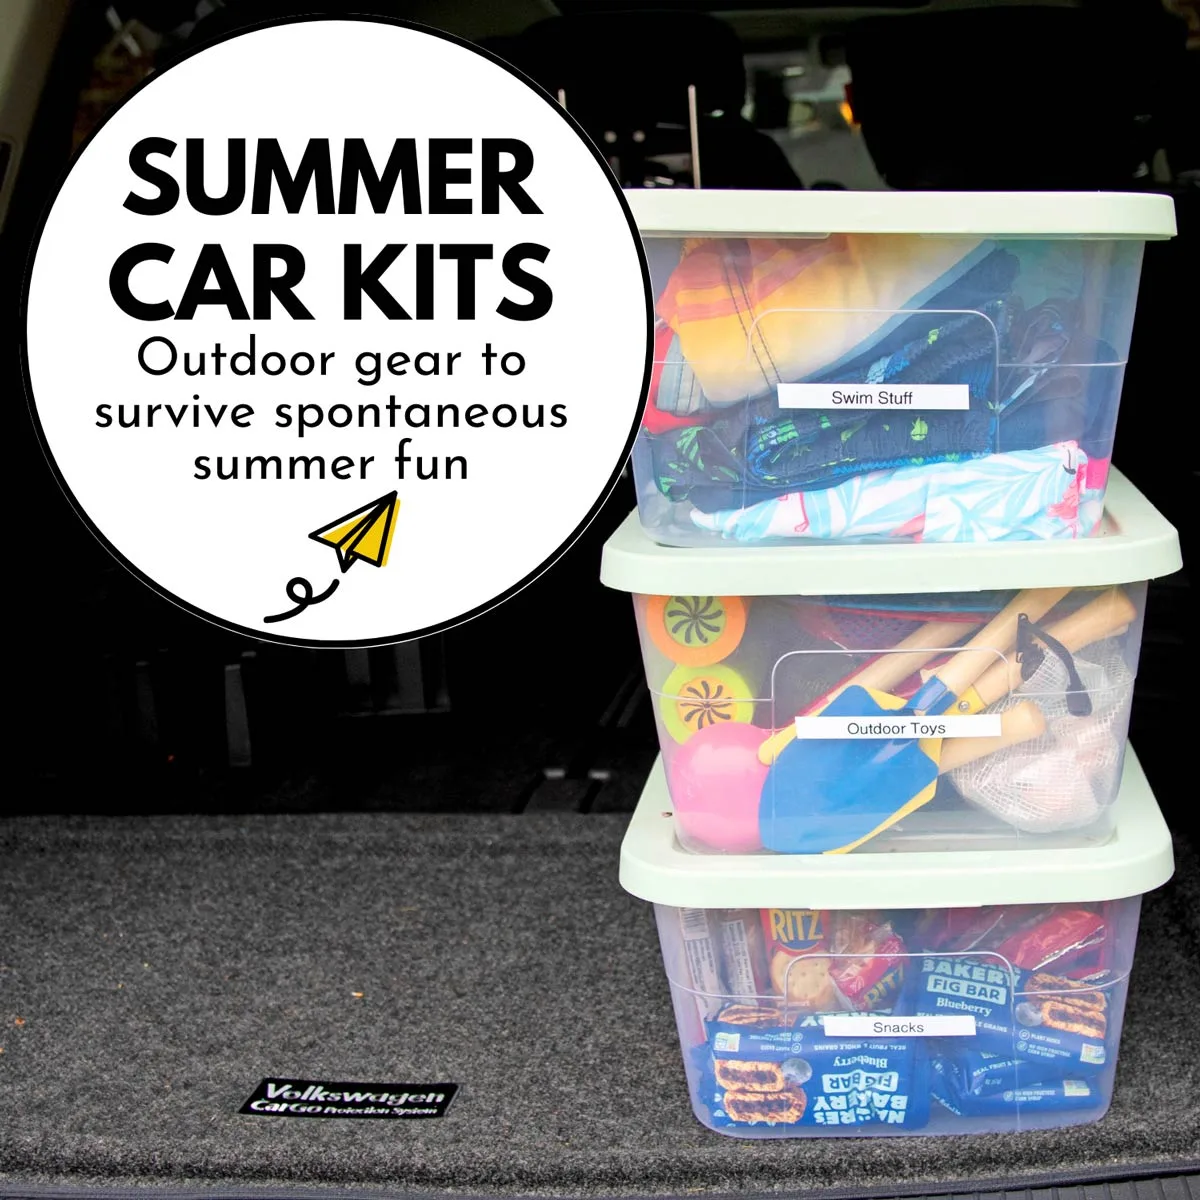 Summer Car Kits: Outdoor gear to survive spontaneous summer fun. Image shows the trunk of a car with three plastic bin stacked. The bins say "swim stuff, outdoor toys, and snacks."